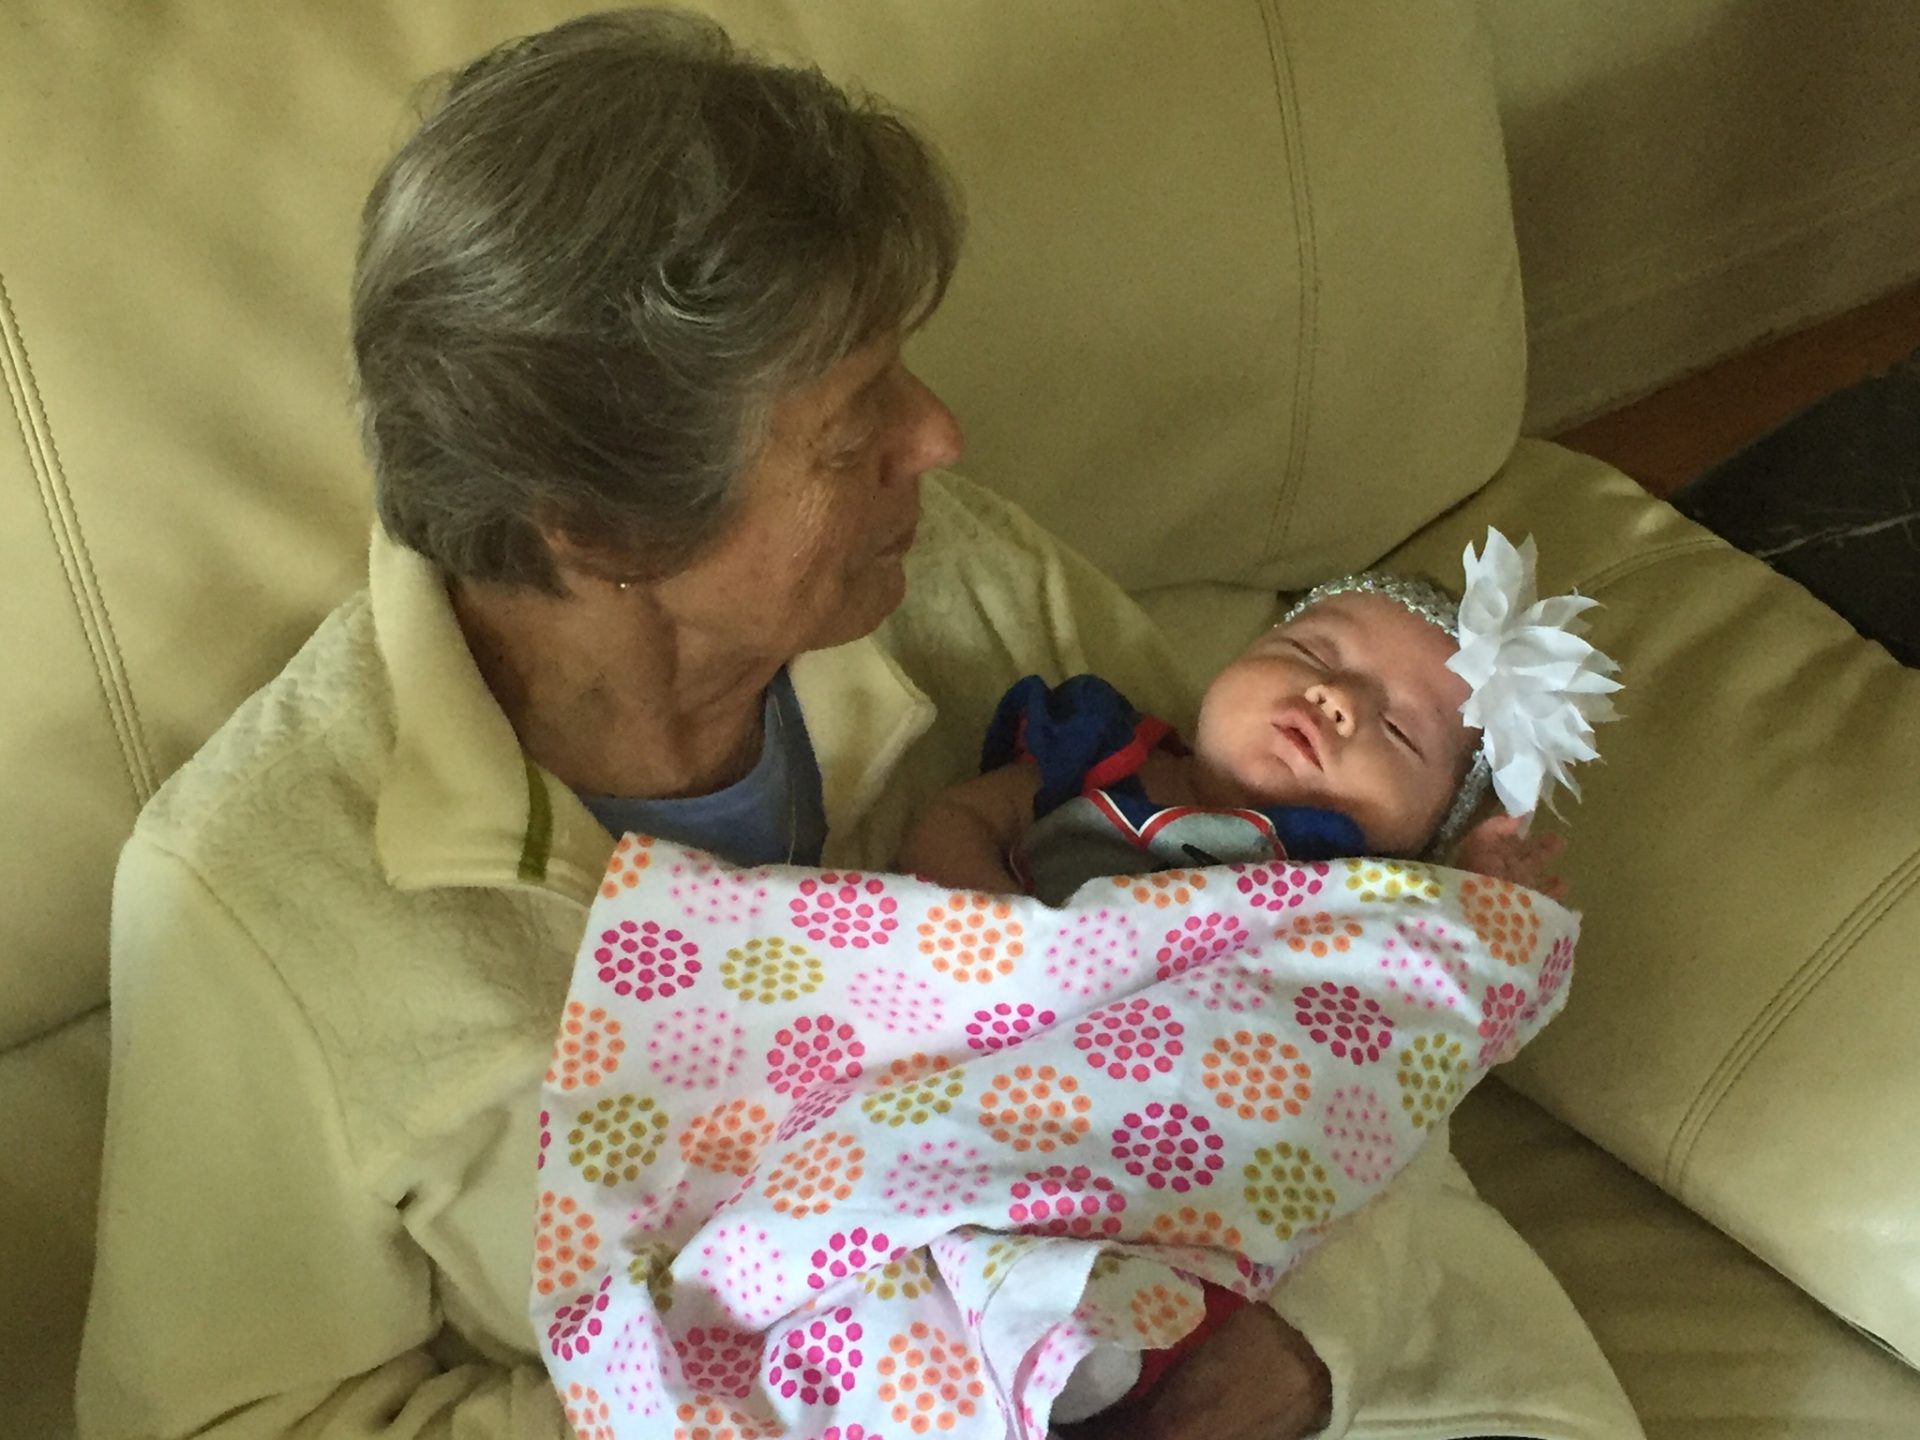 This is the first time she met her great granddaughter, Amelia. She was very comfortable having Great Grandma D holding her. My mom was a special lady.